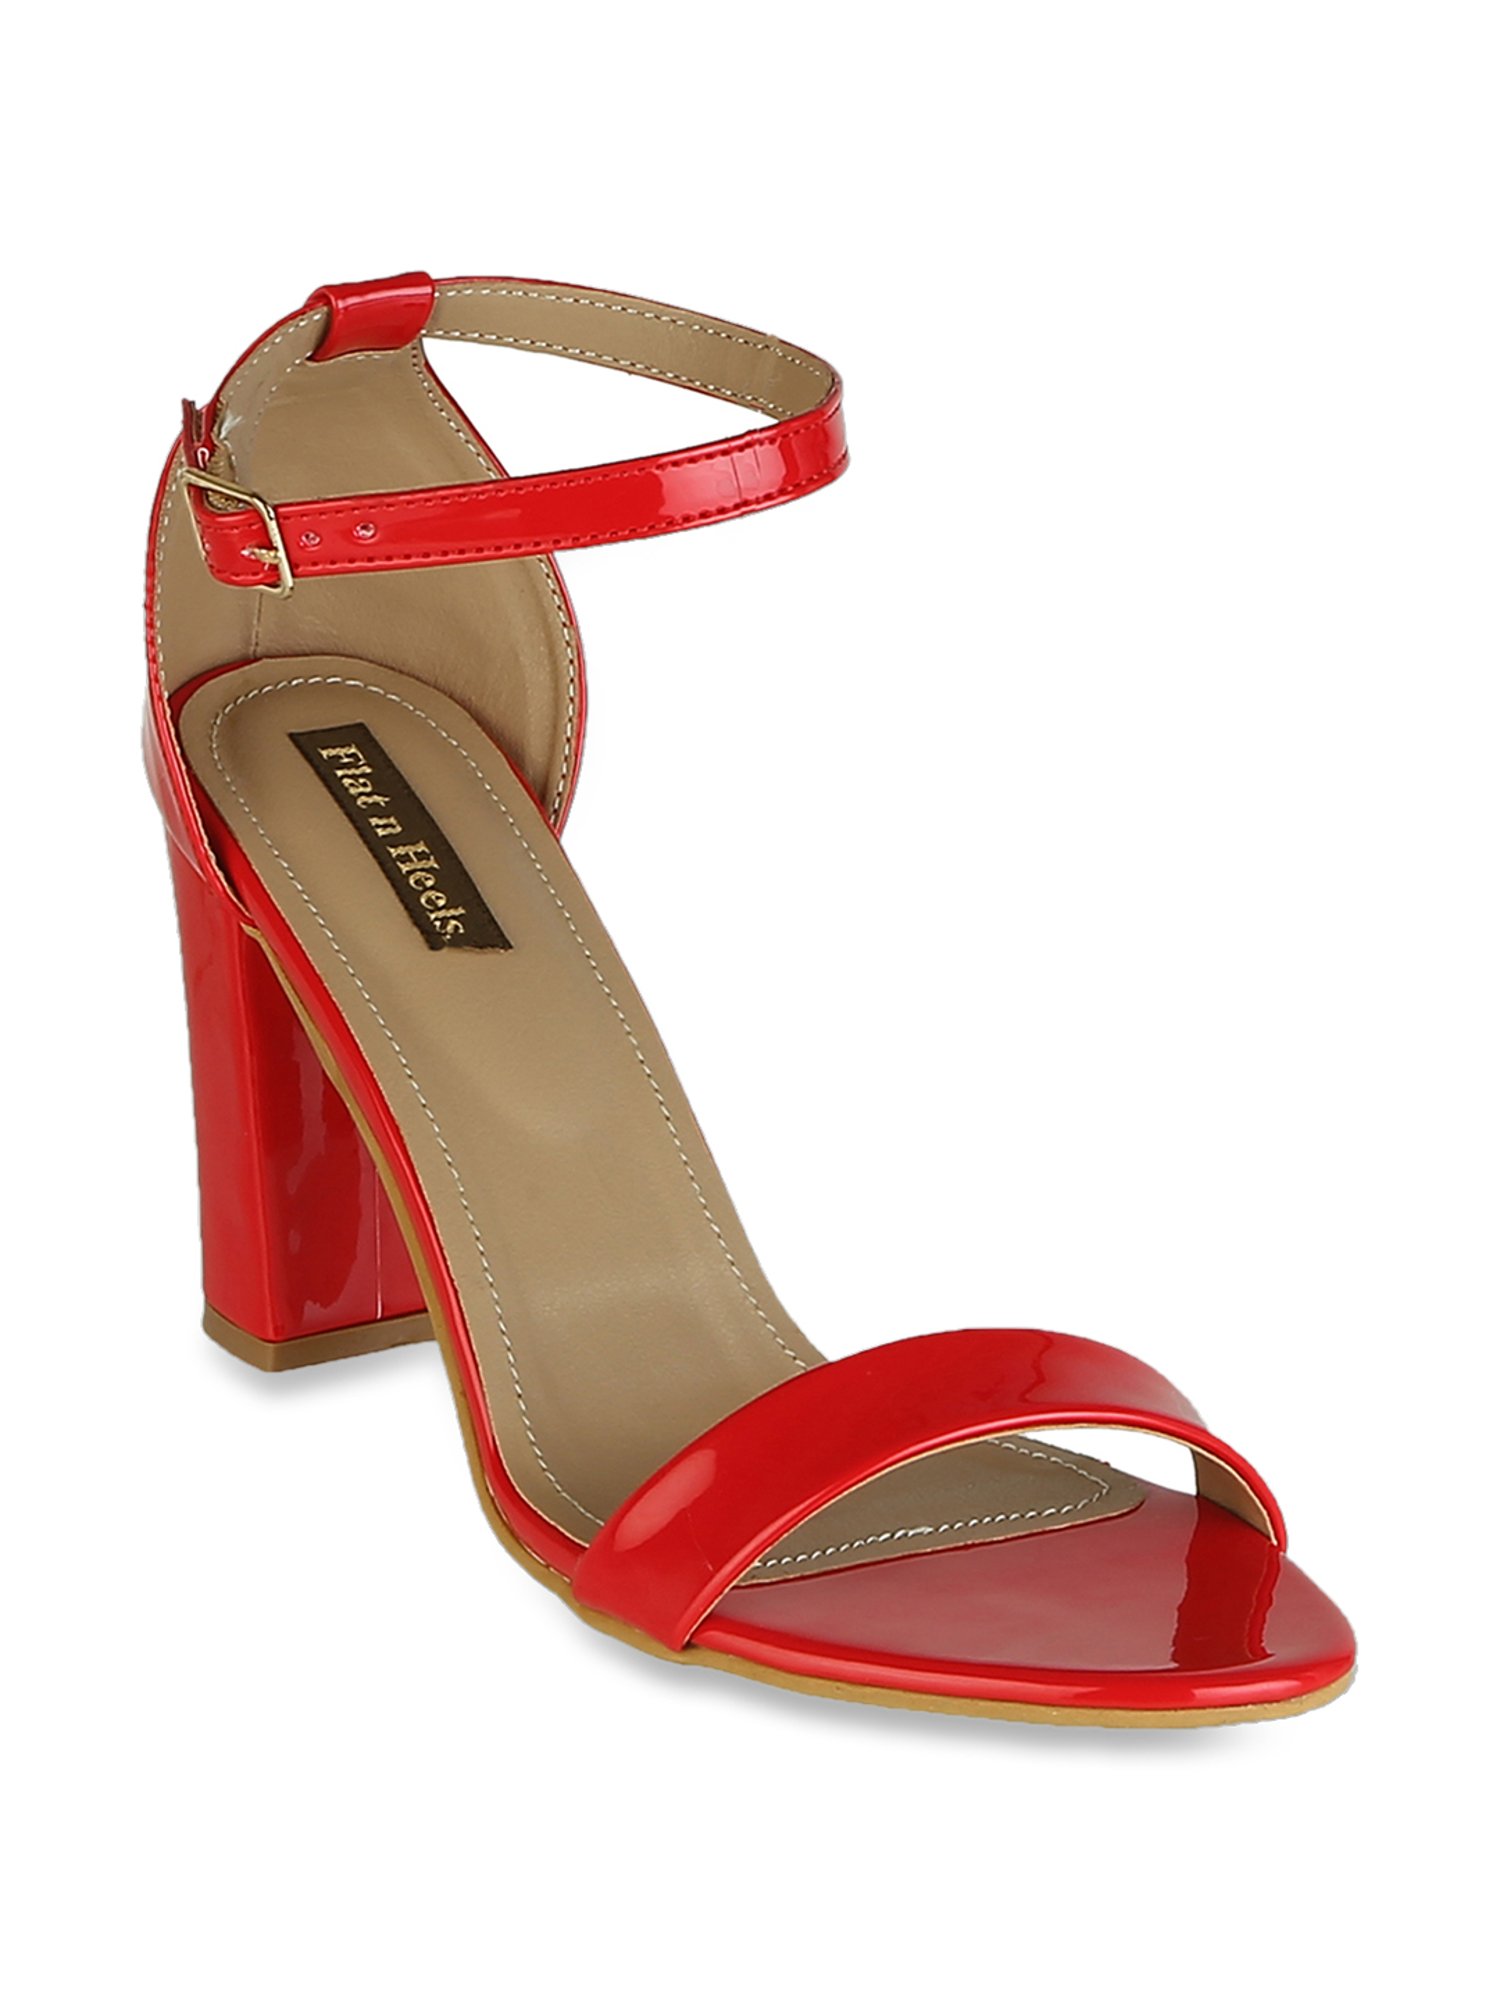 Buy Flat N Heels Women's Red Ankle Strap Sandals for Women at Best Price @  Tata CLiQ